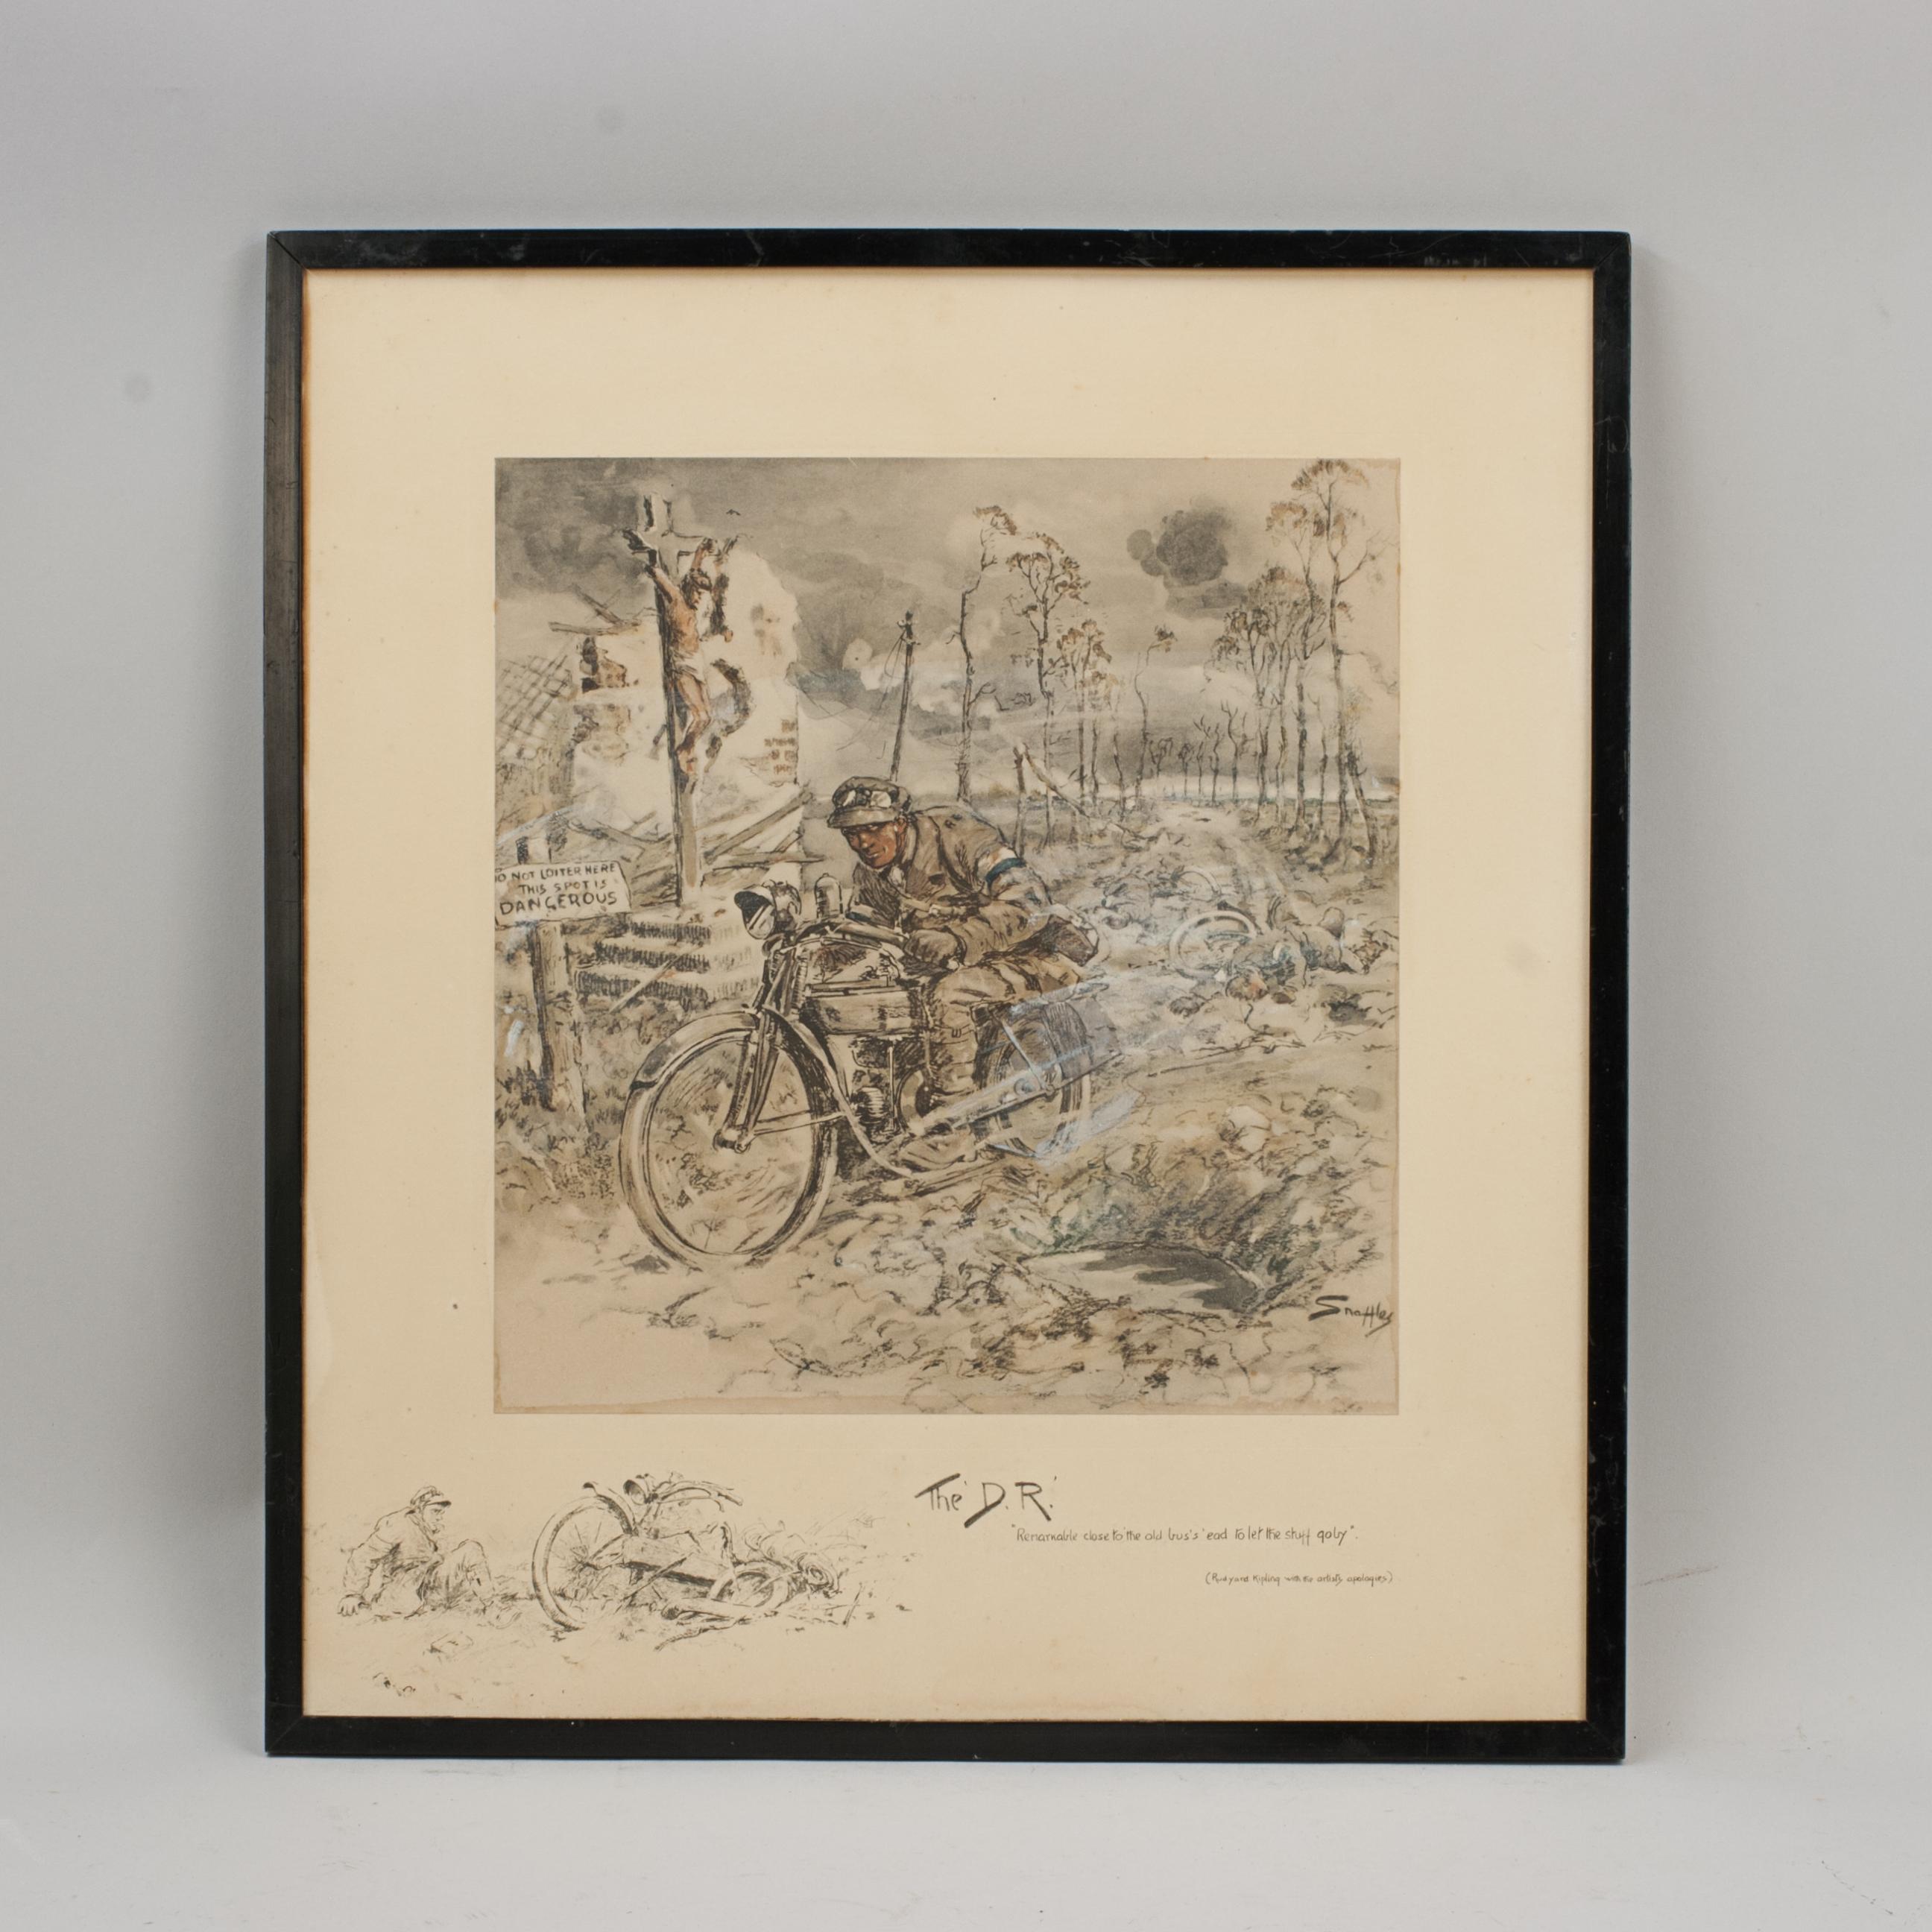 Vintage Snaffles WWI Military Print, The D.R.
A good hand coloured Snaffles WWI military print 'The D.R.'. The main center colour-piece image is mounted onto the printed remarque board and shows a despatch rider on a motor cycle racing past two dead